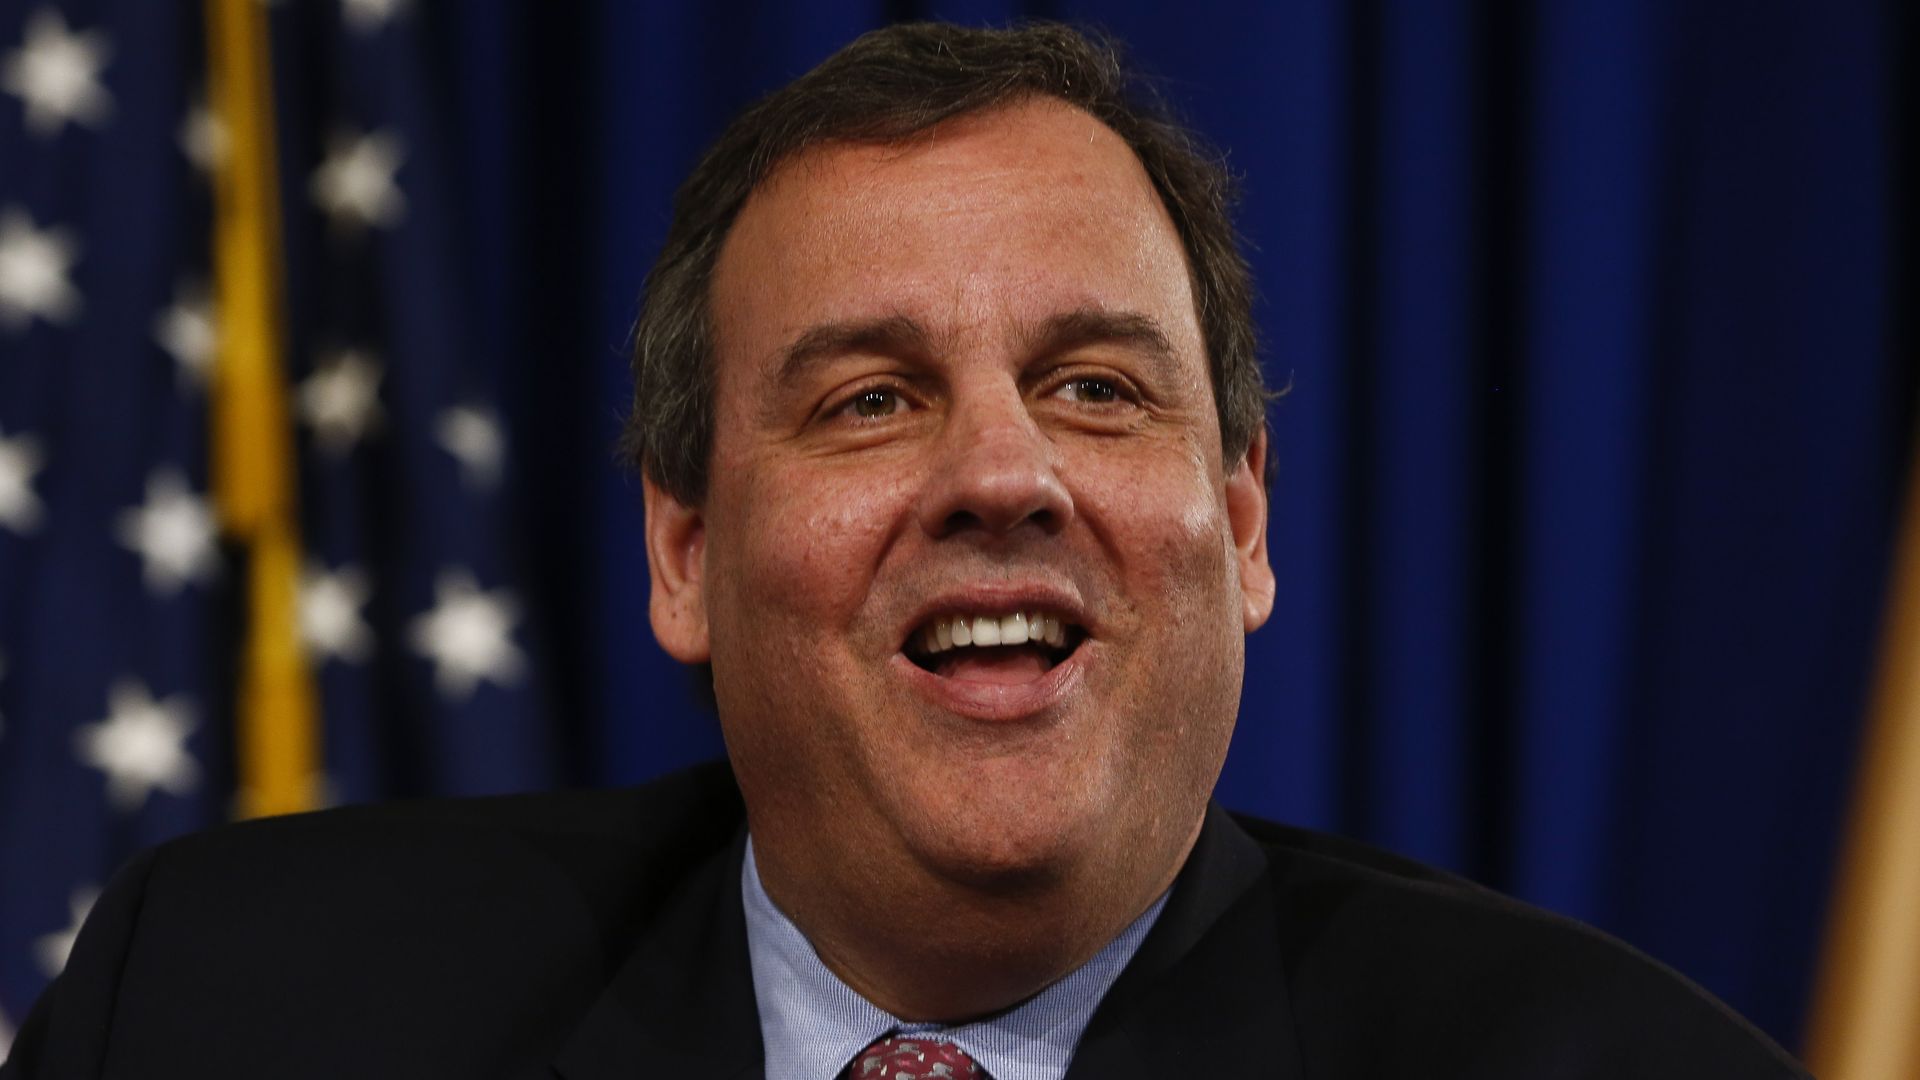 Chris Christie unplugged: In exclusive book excerpt, the Trump pal torches Jared Kushner